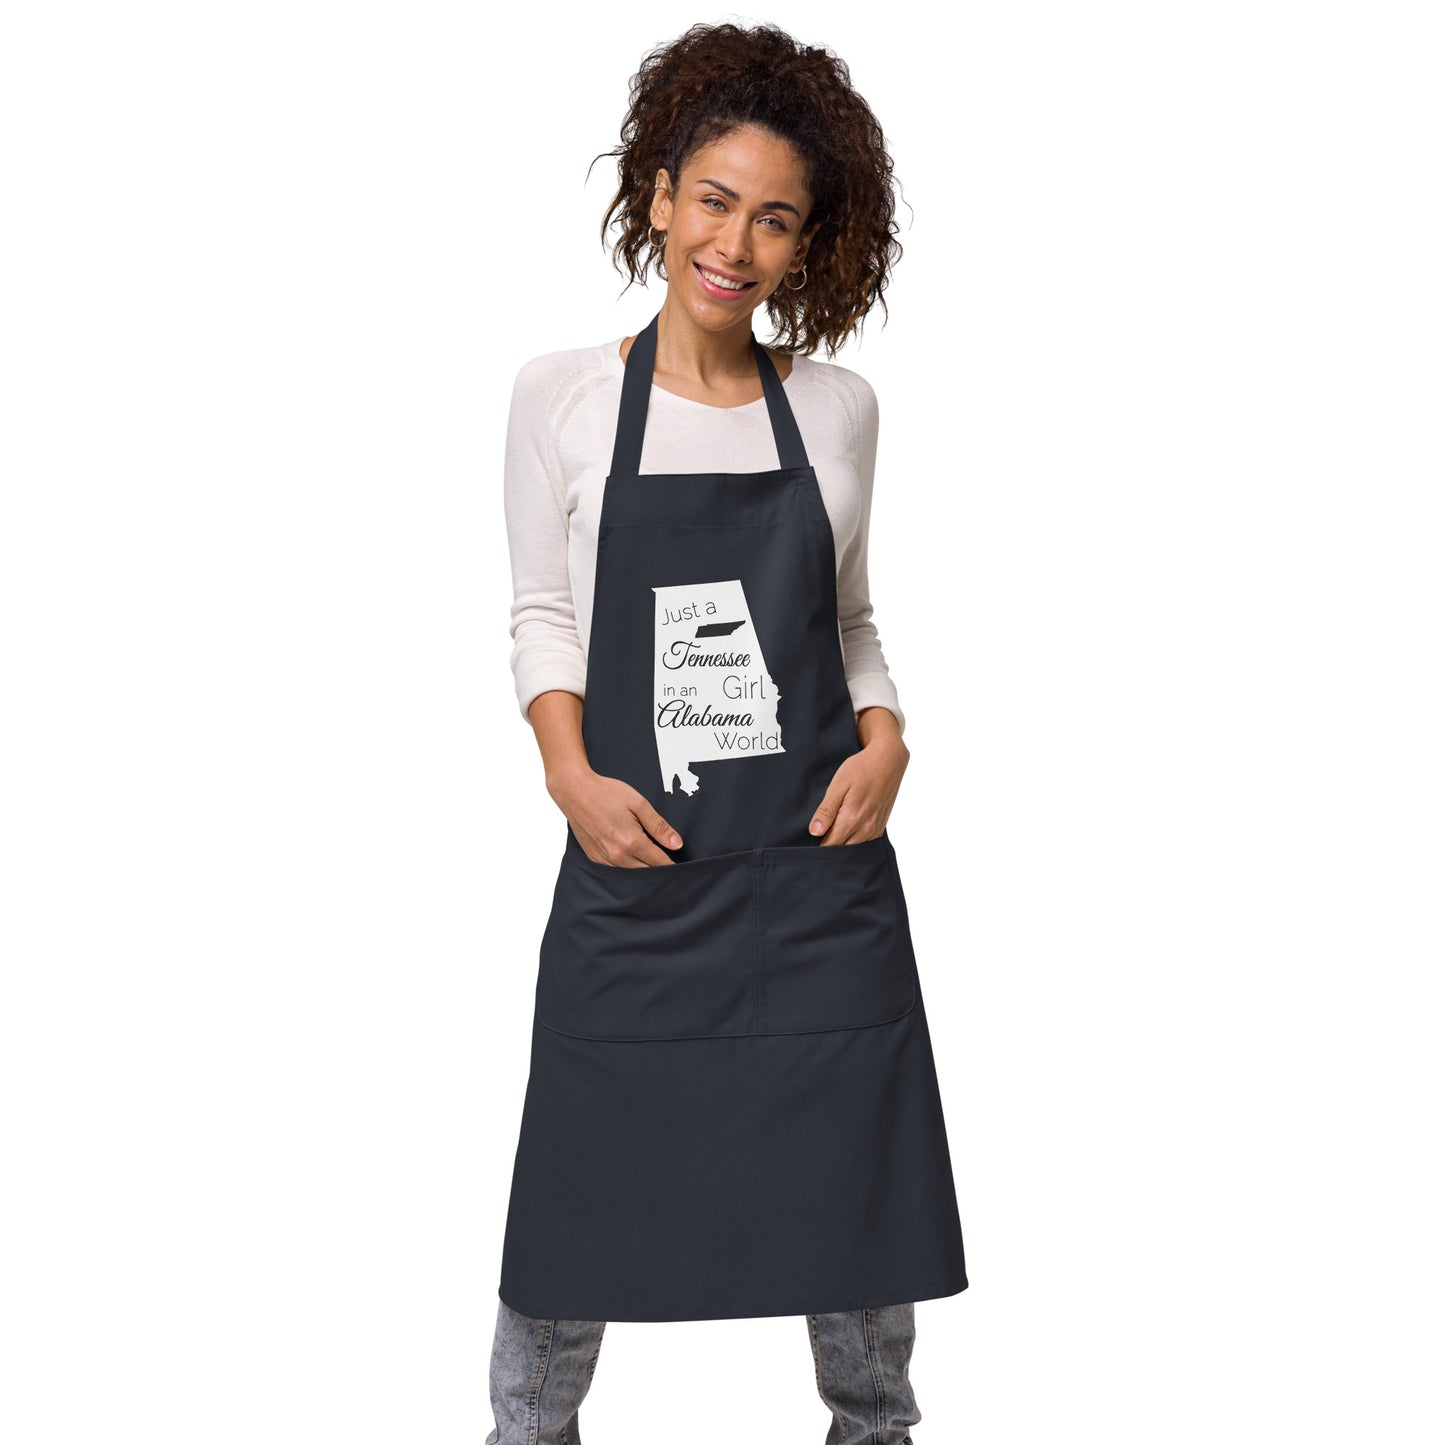 Just a Tennessee Girl in an Alabama World Organic cotton apron